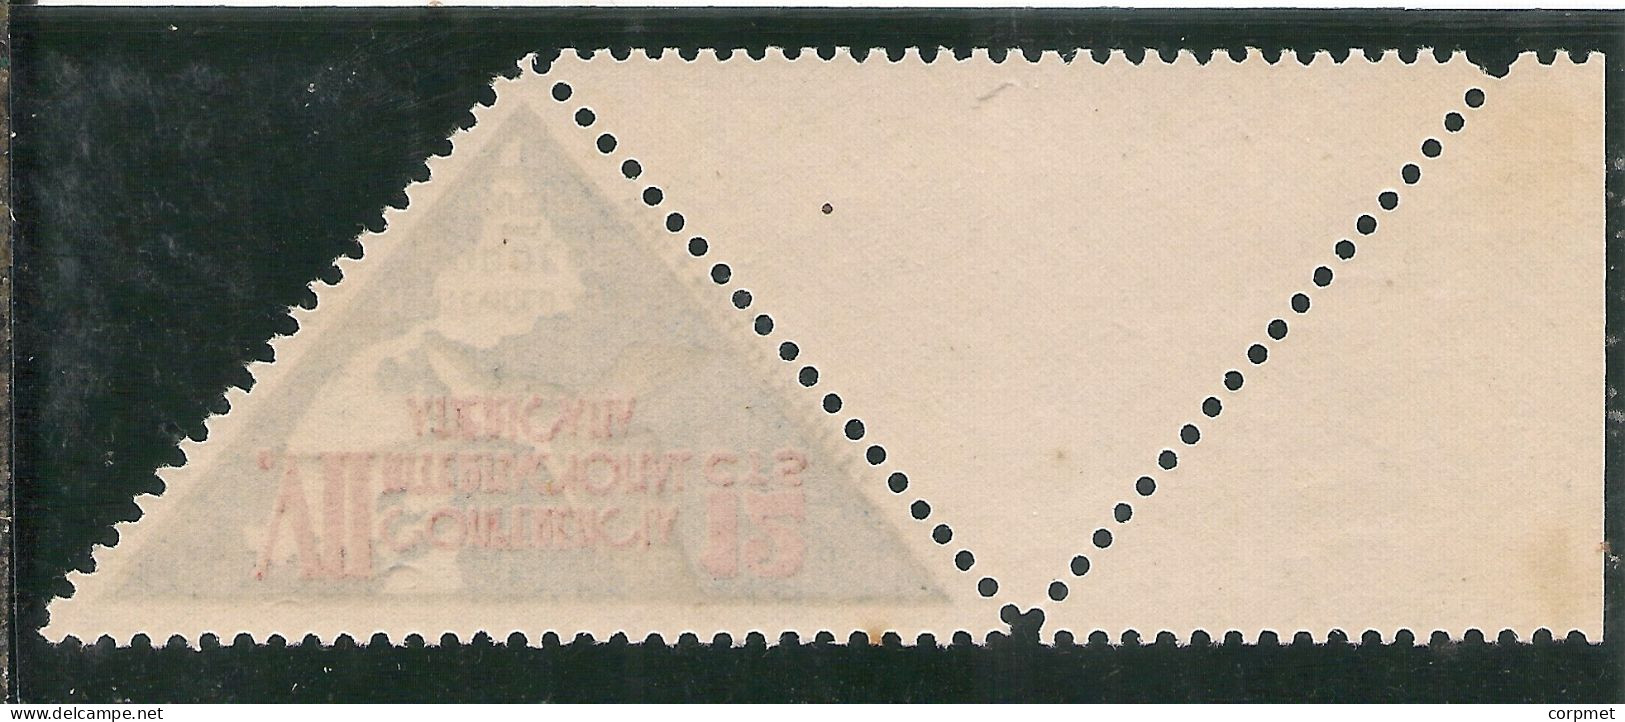 URUGUAY 1933 CONF. PANAMERICANA Yv. 462/7 MNH MARGINAL With Additional Blank Stamp -included Variety CIARDI 464b Scan 2 - Uruguay